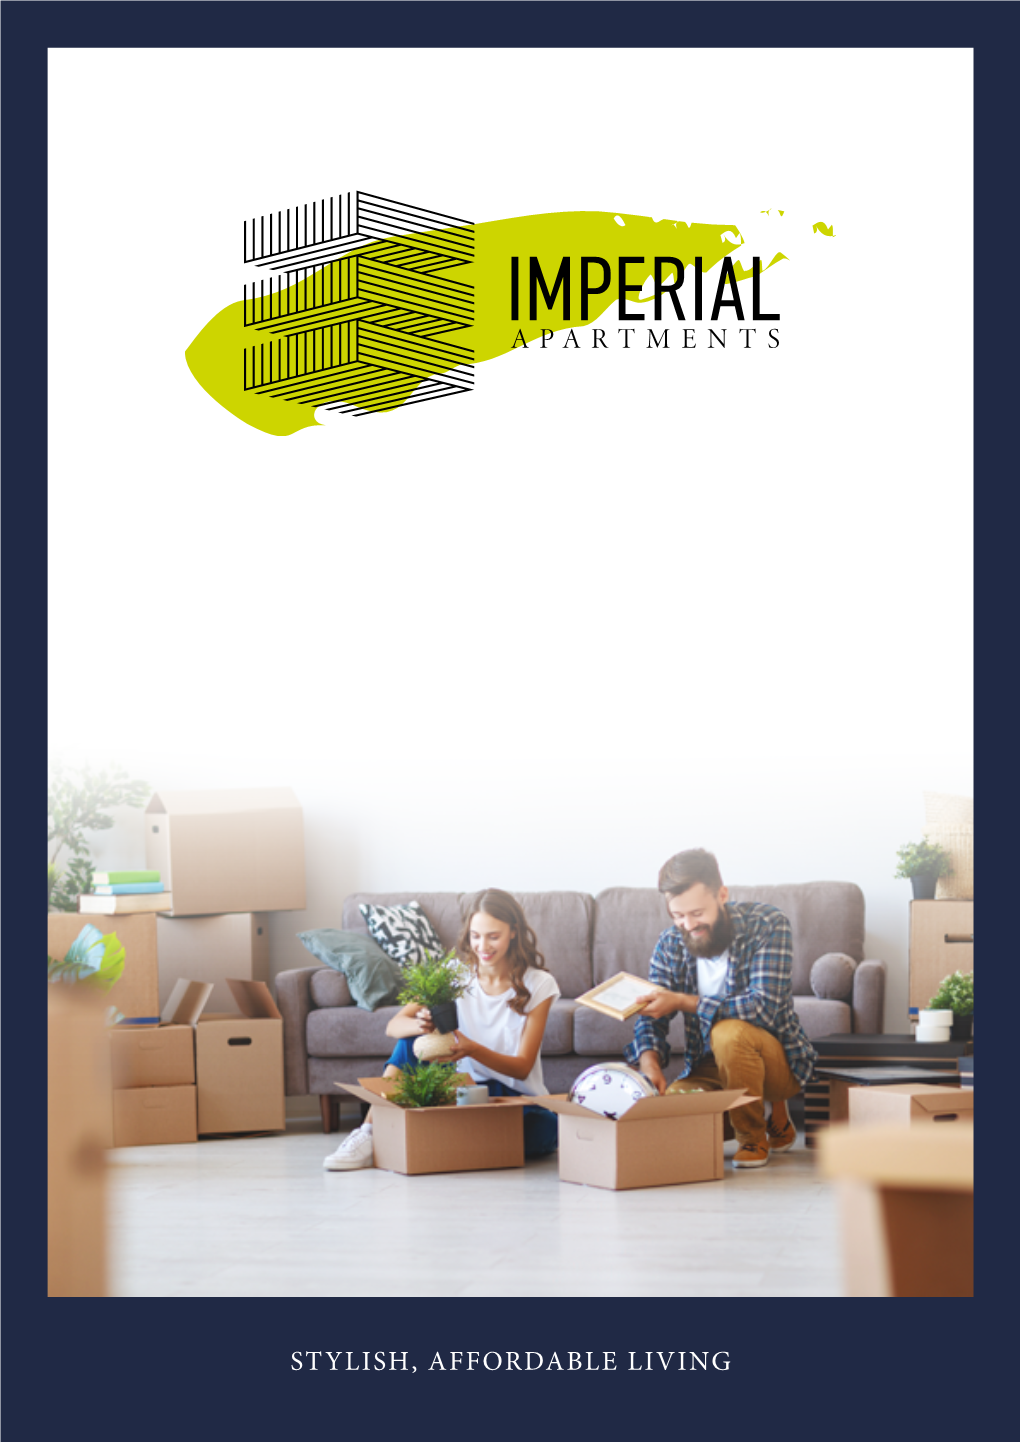 STYLISH, AFFORDABLE LIVING IMPERIAL APARTMENTS Imperial Apartments Is a Large Residential Development of 465 Apartments Delivered Over Two Phases